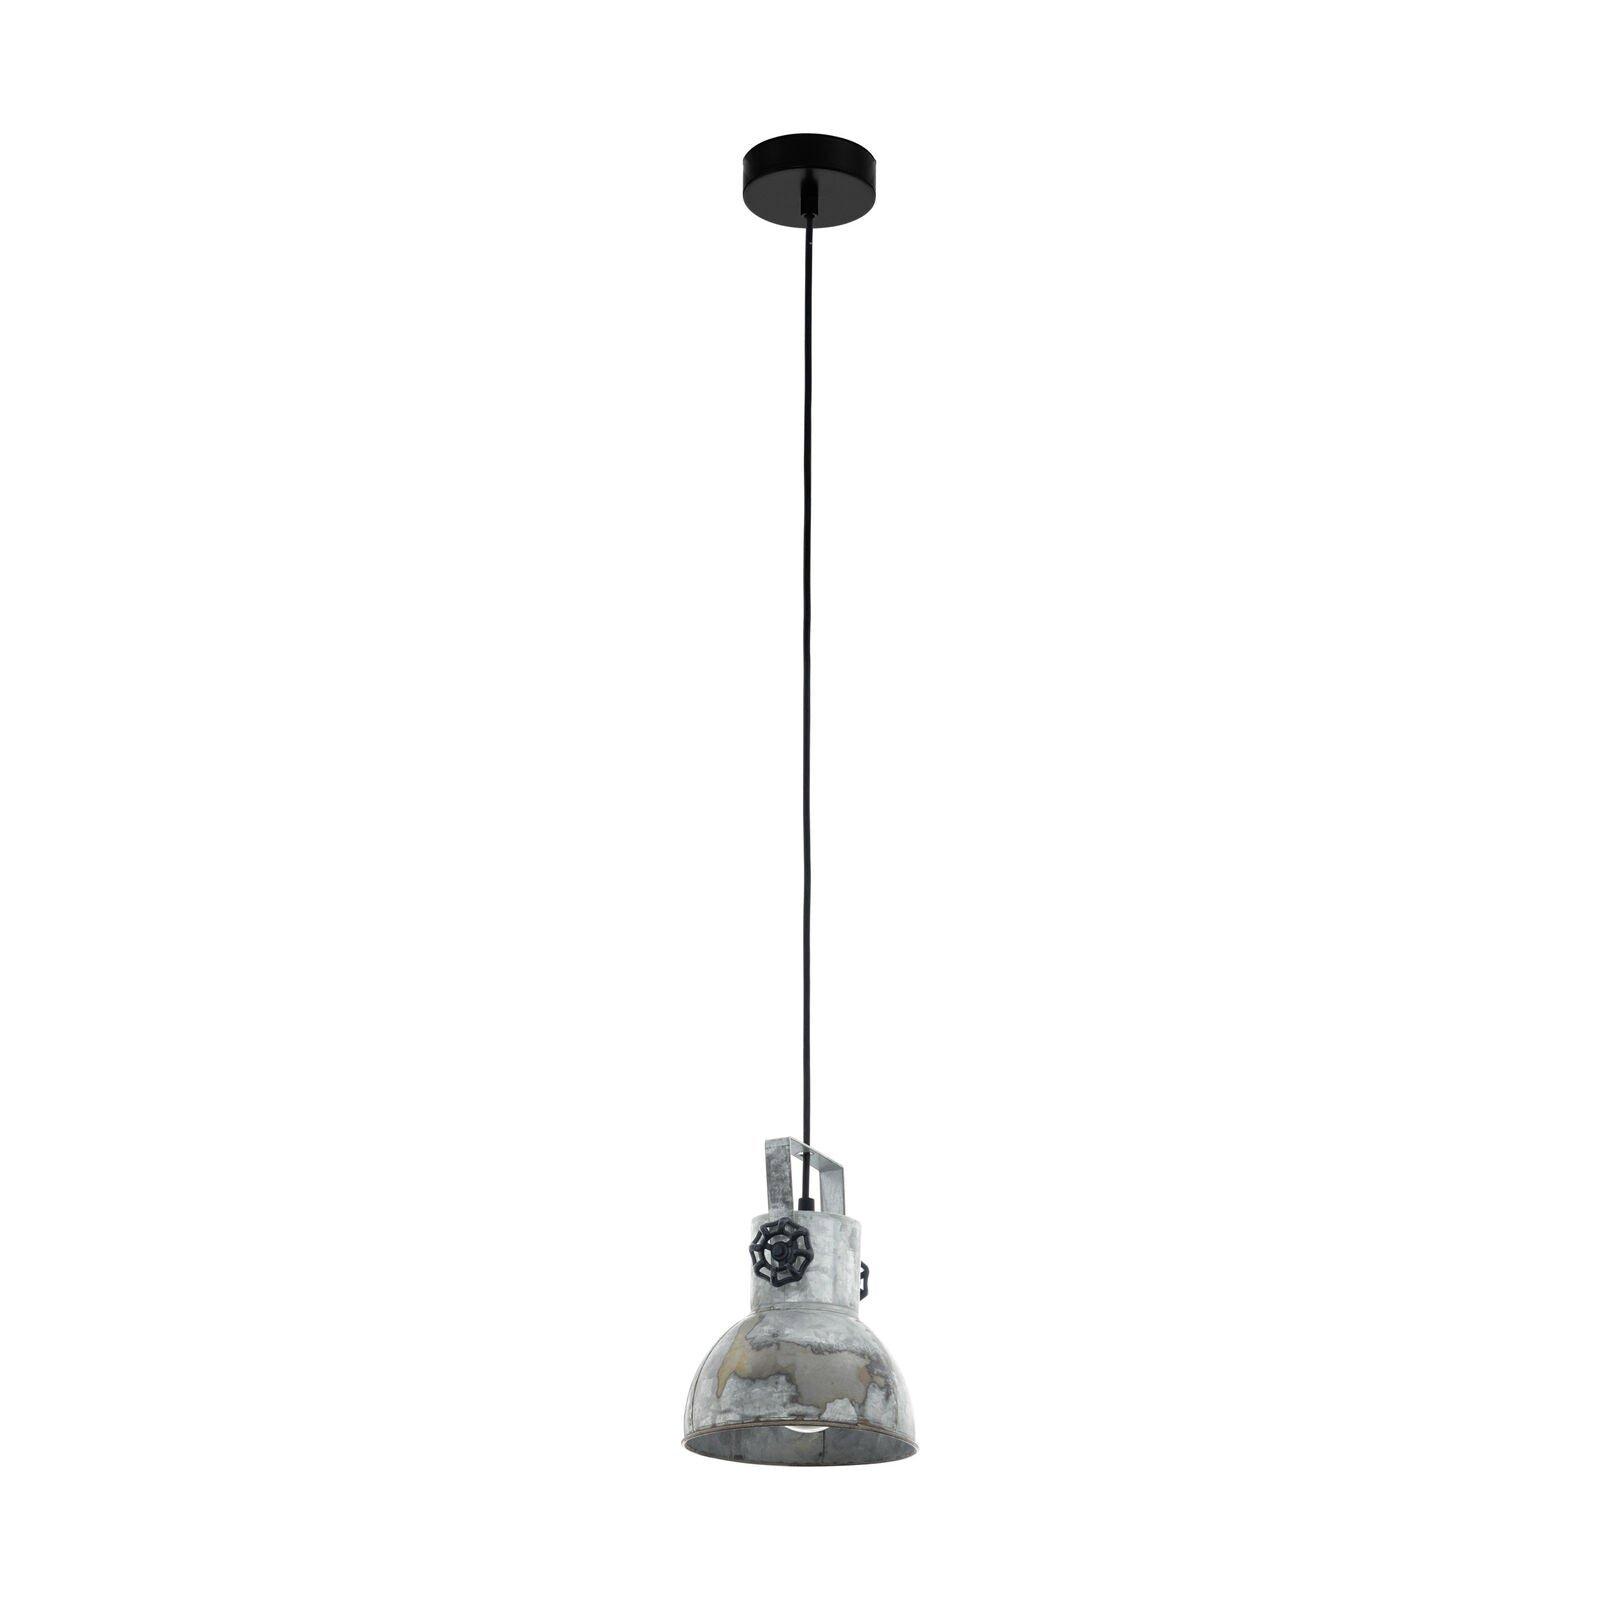 Hanging Ceiling Pendant Light Black & Raw Steel 1x 40W E27 Industrial Feature